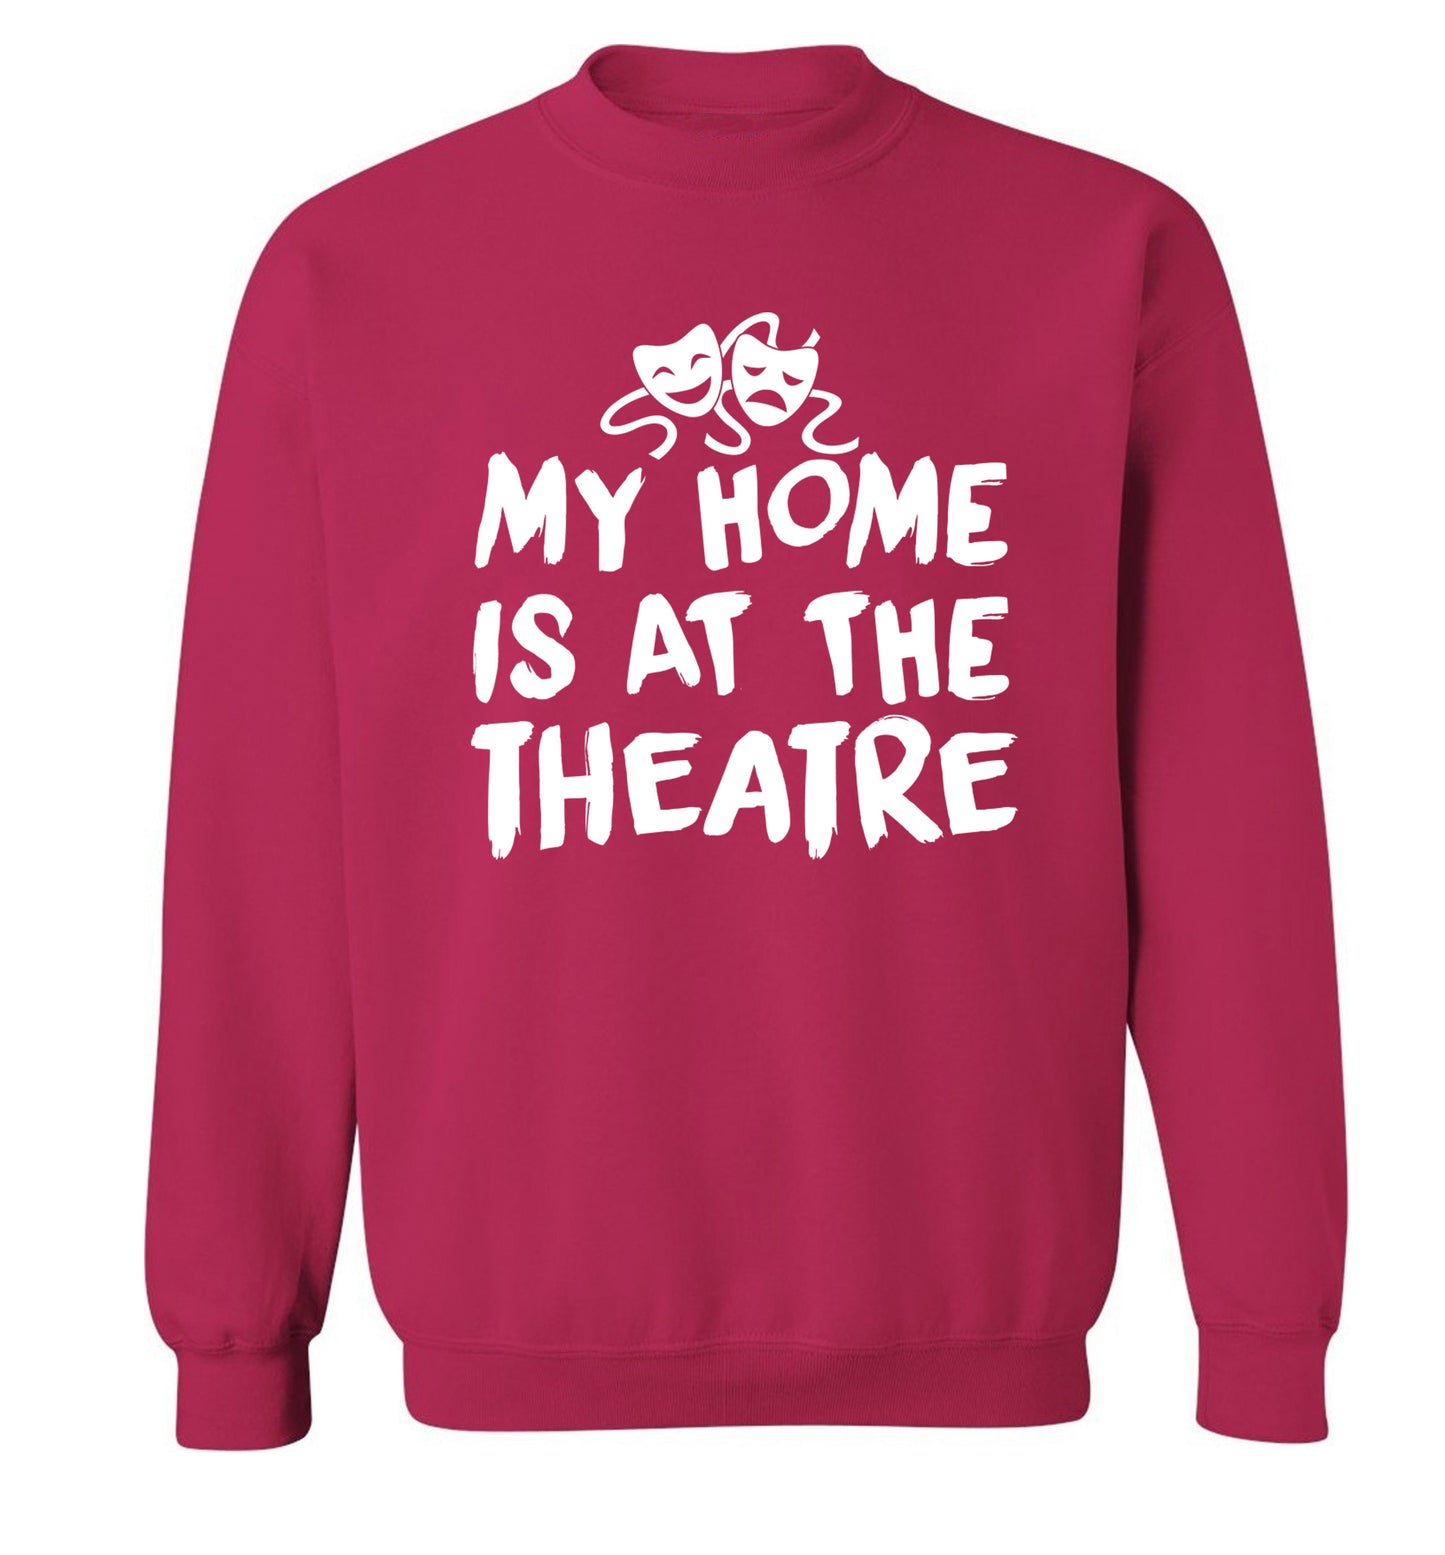 My home is at the theatre Adult's unisex pink Sweater 2XL